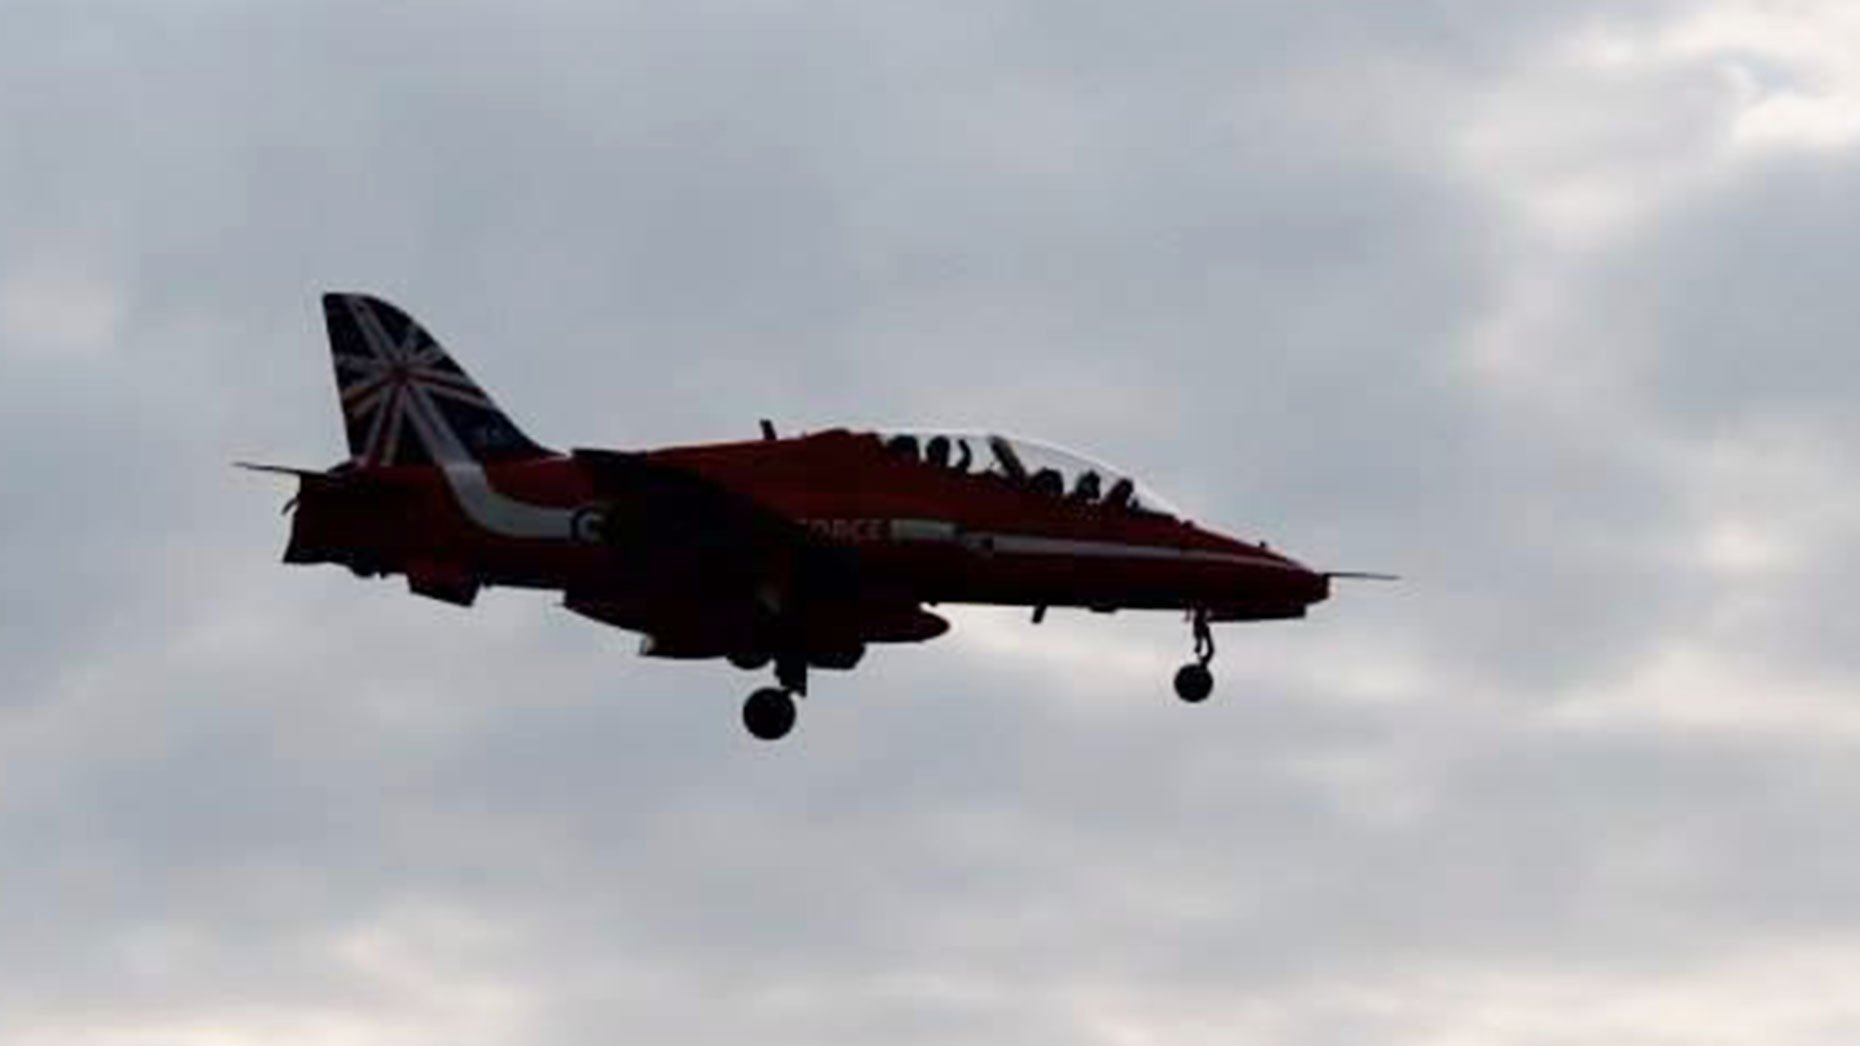 Red Arrows pilot waves as the team fly over Lincoln on May 31, 2014. Photo: Joanne Guest